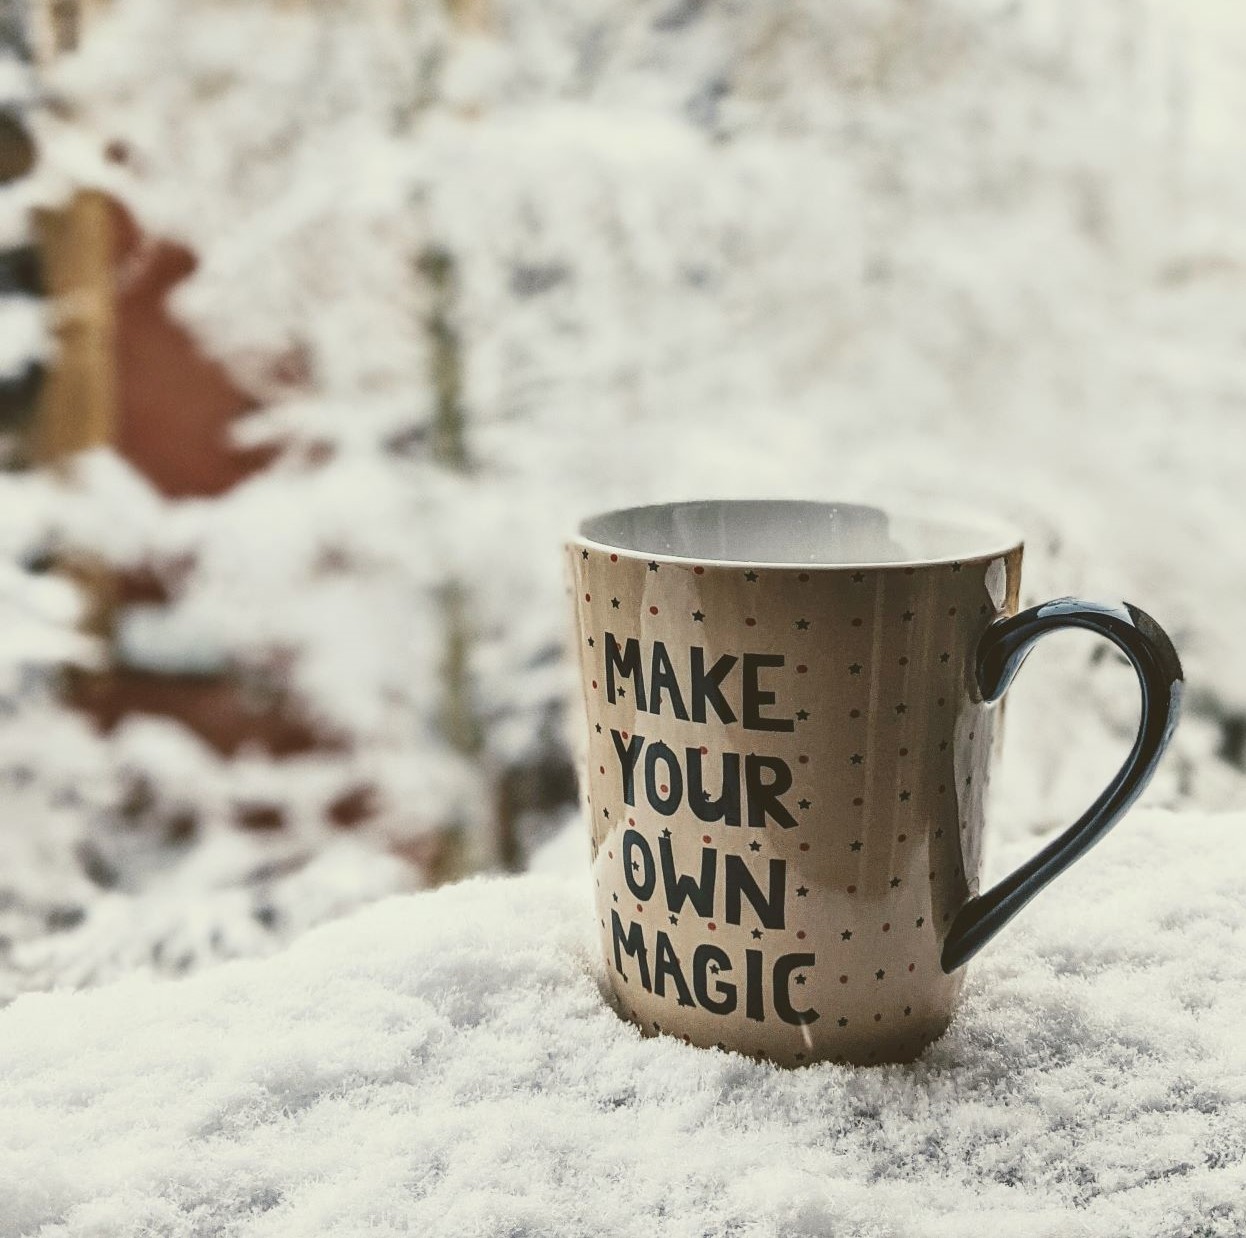 mug with words create your own magic, mug is on a rock with winter snow in the background